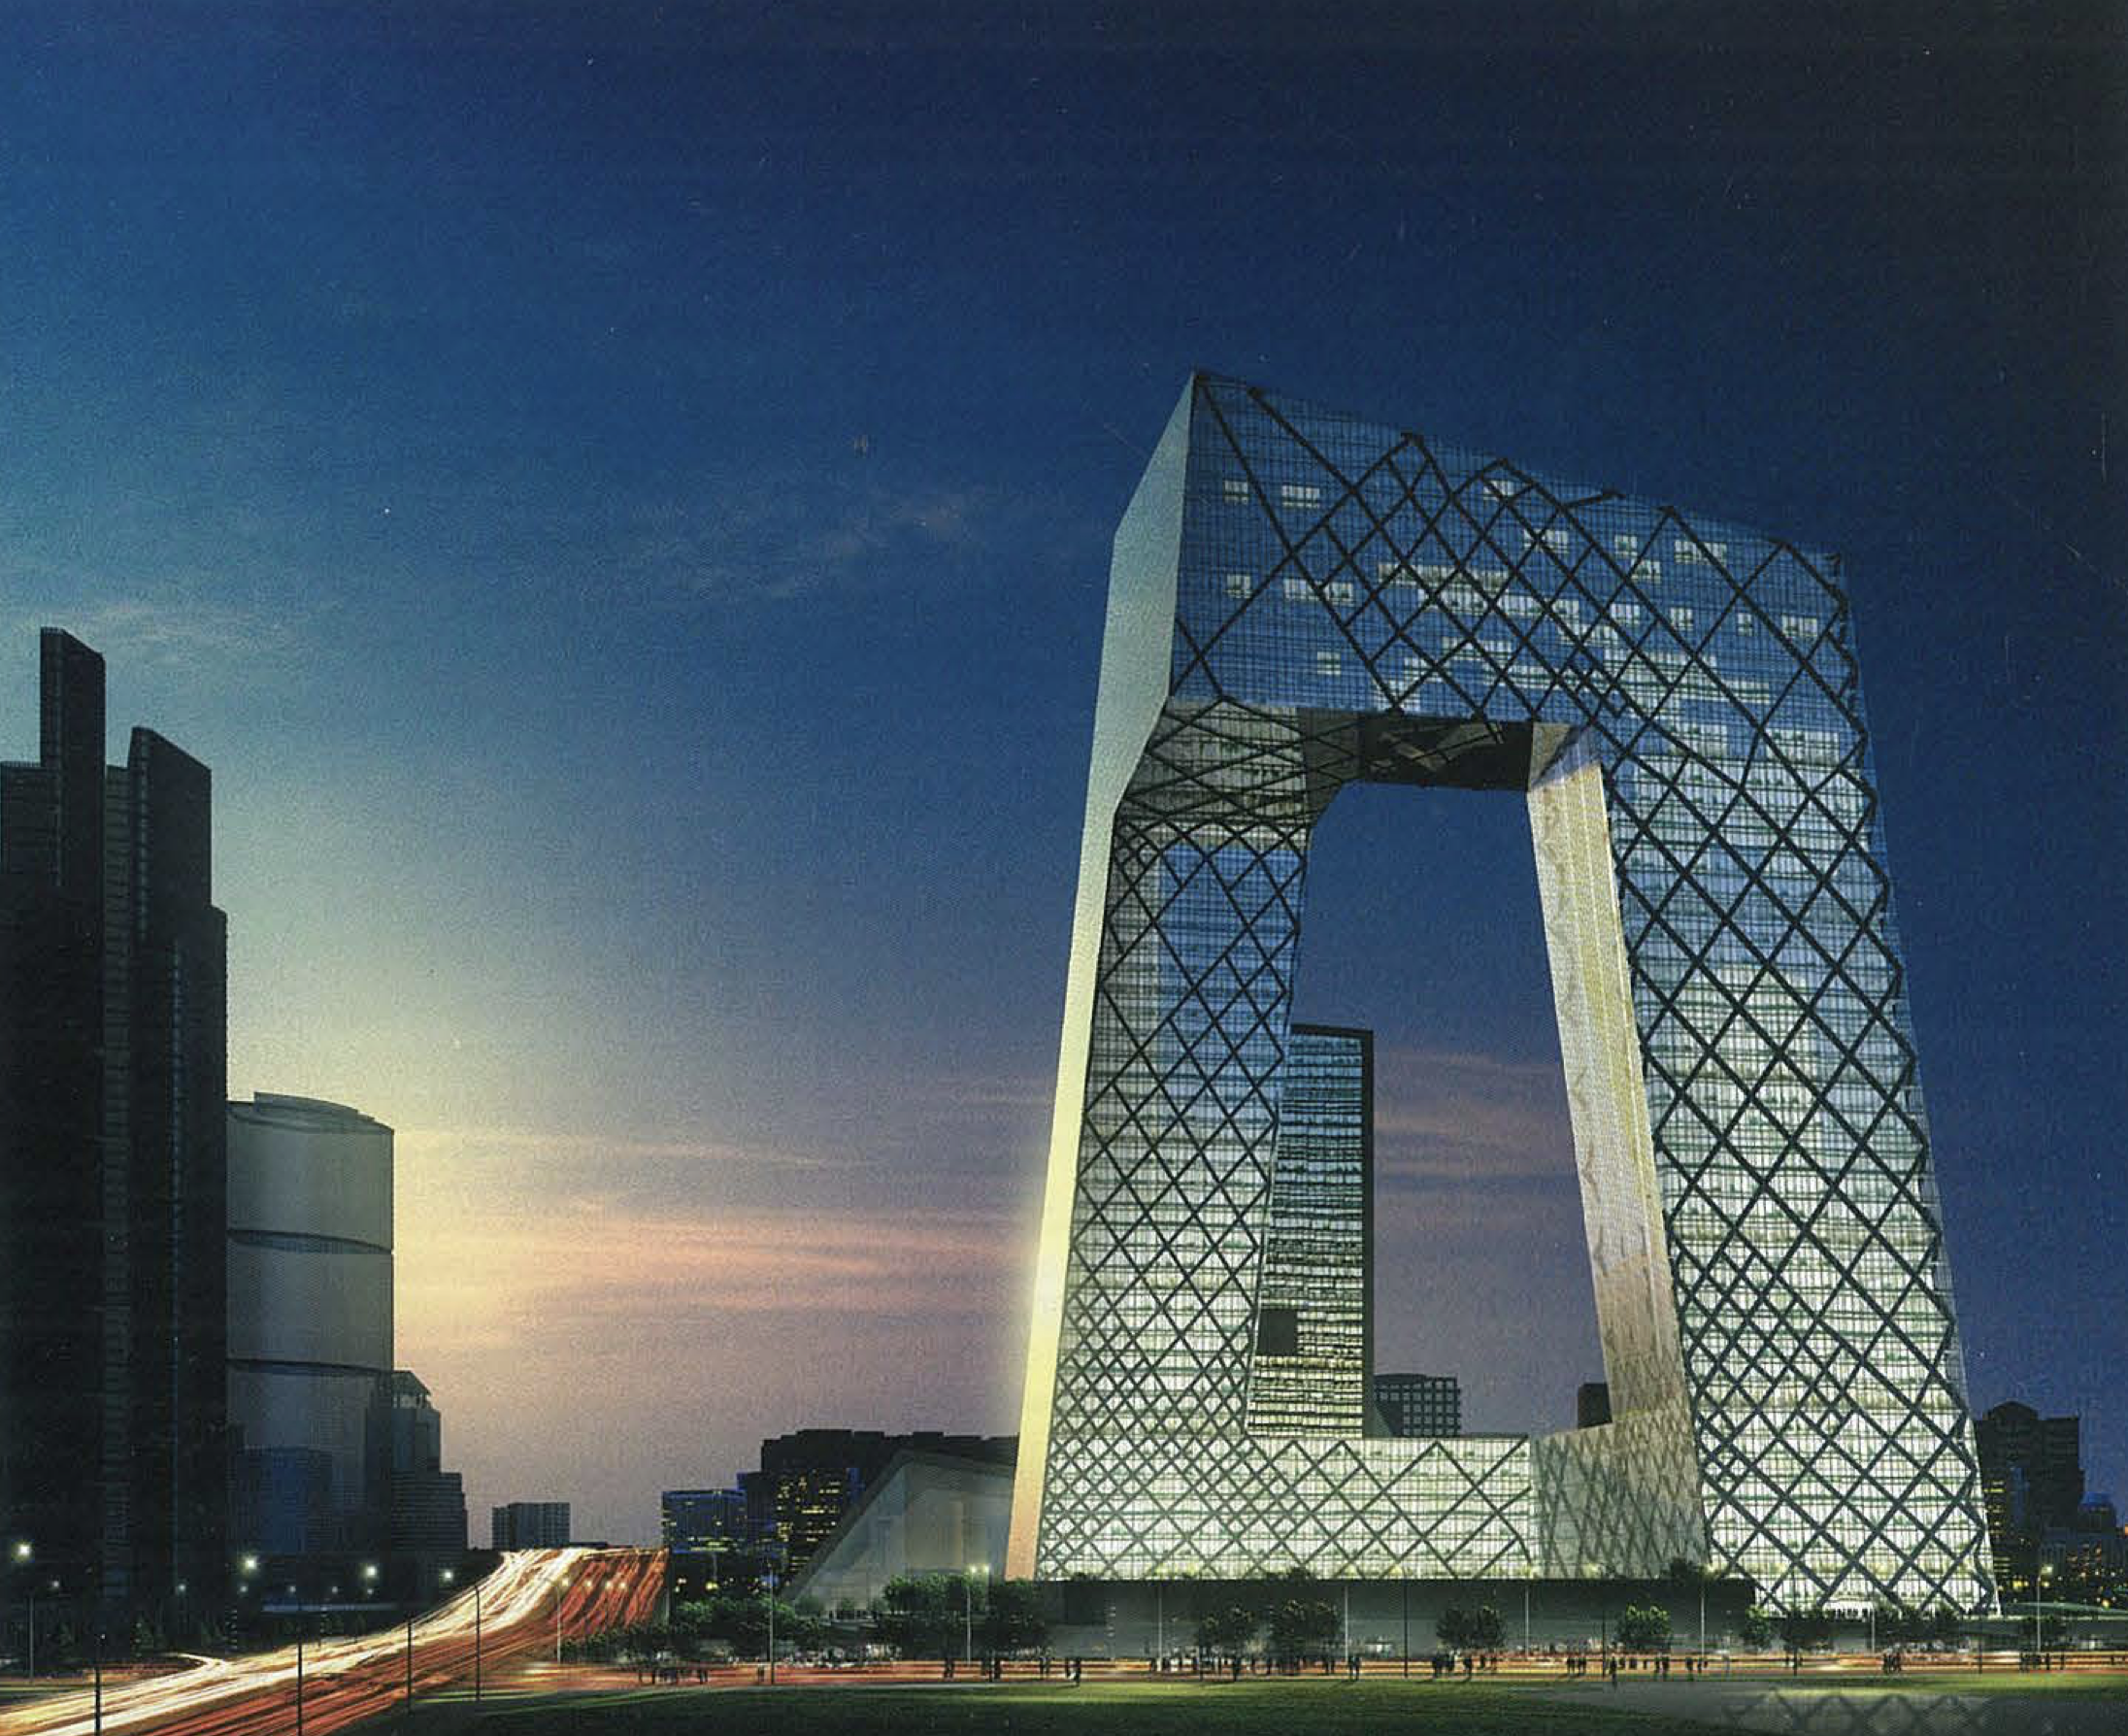 The CCTV building and surrounding landscape